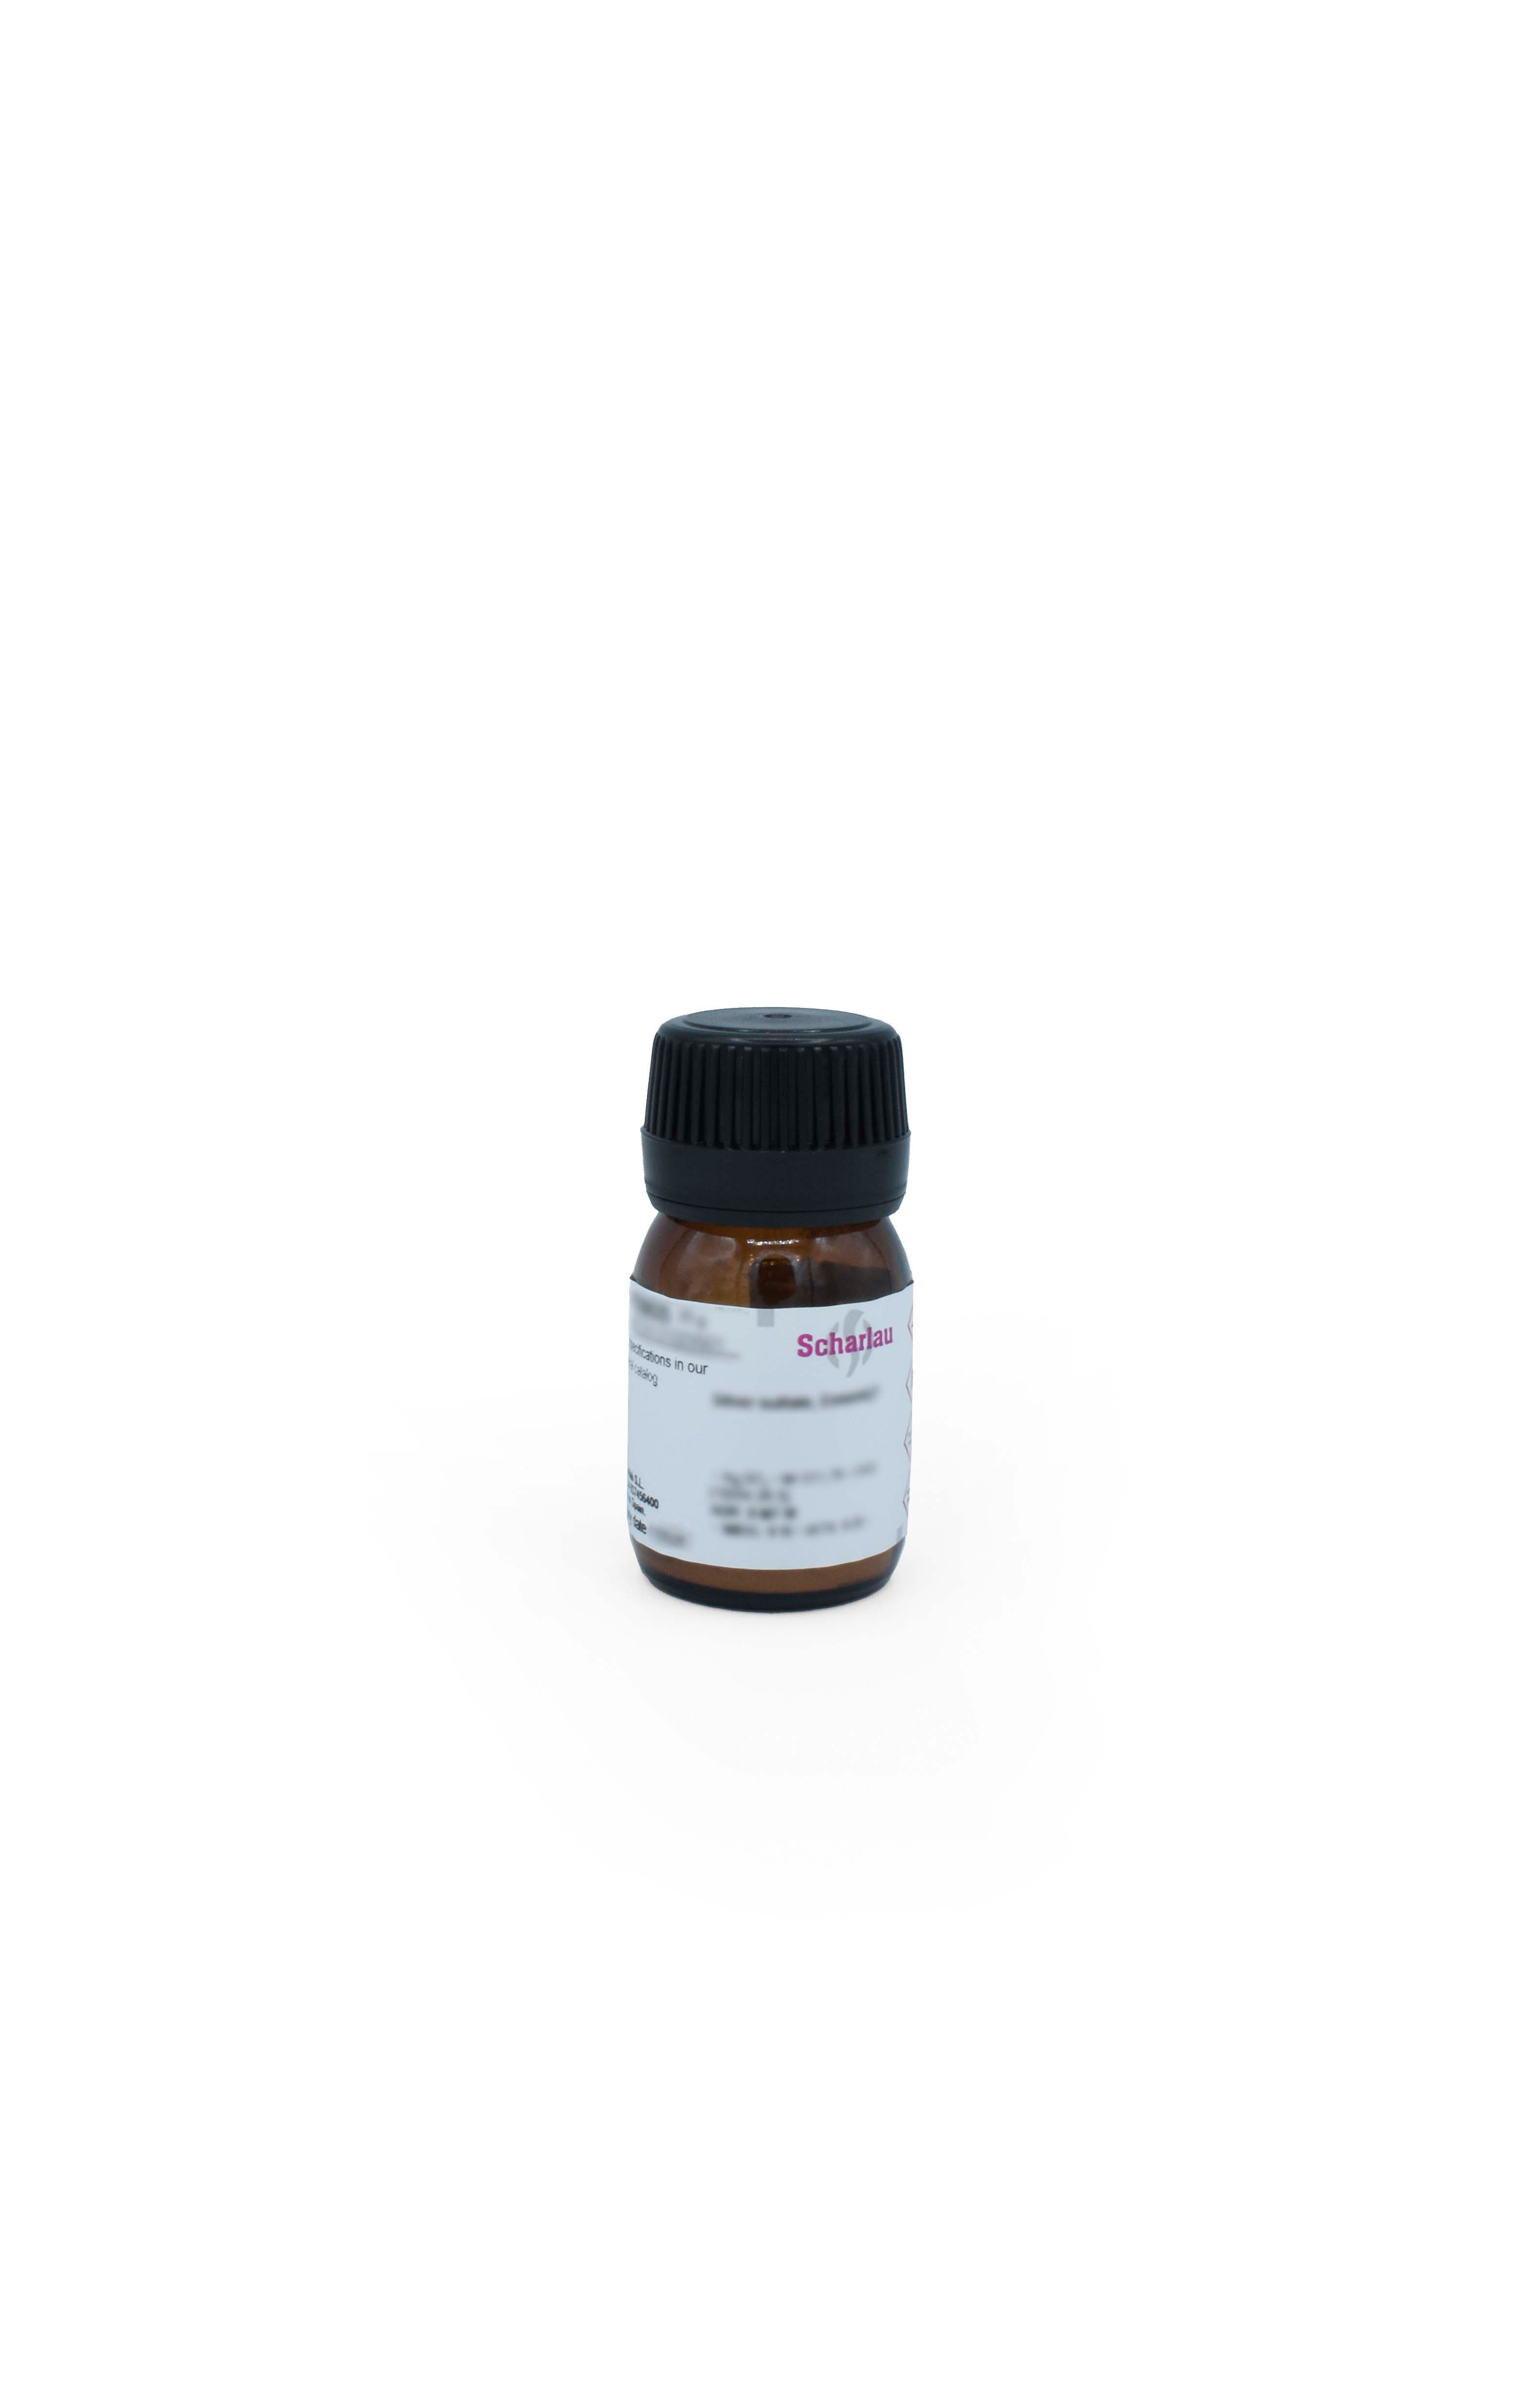 Orcein, for microscopy, Natural Red 28